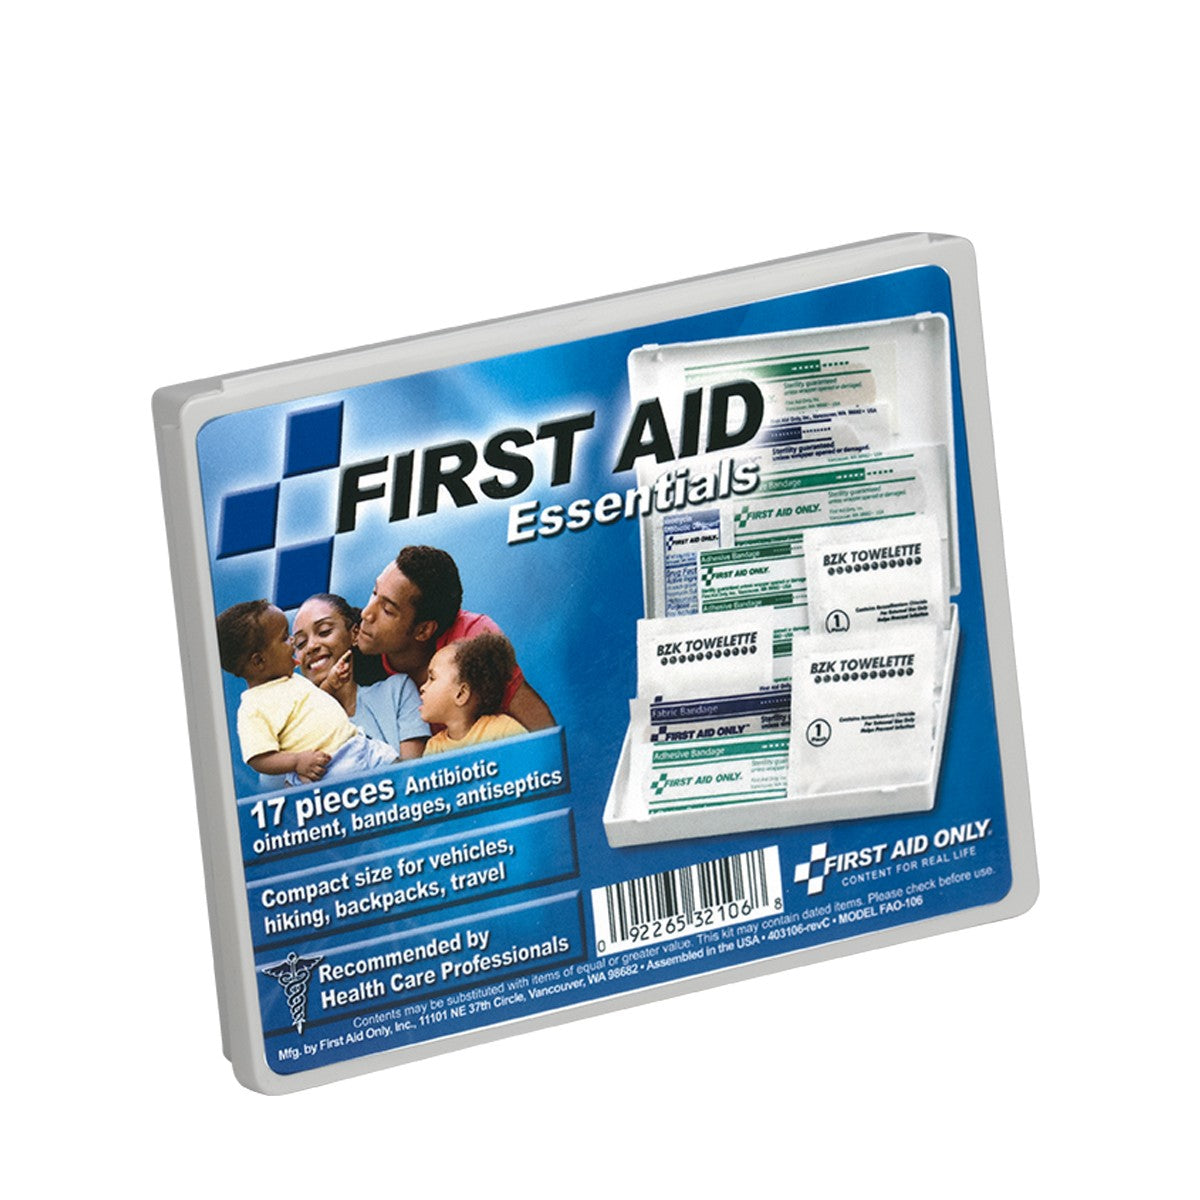 16 Piece Travel First Aid Kit, Plastic Case - W-FAO-106